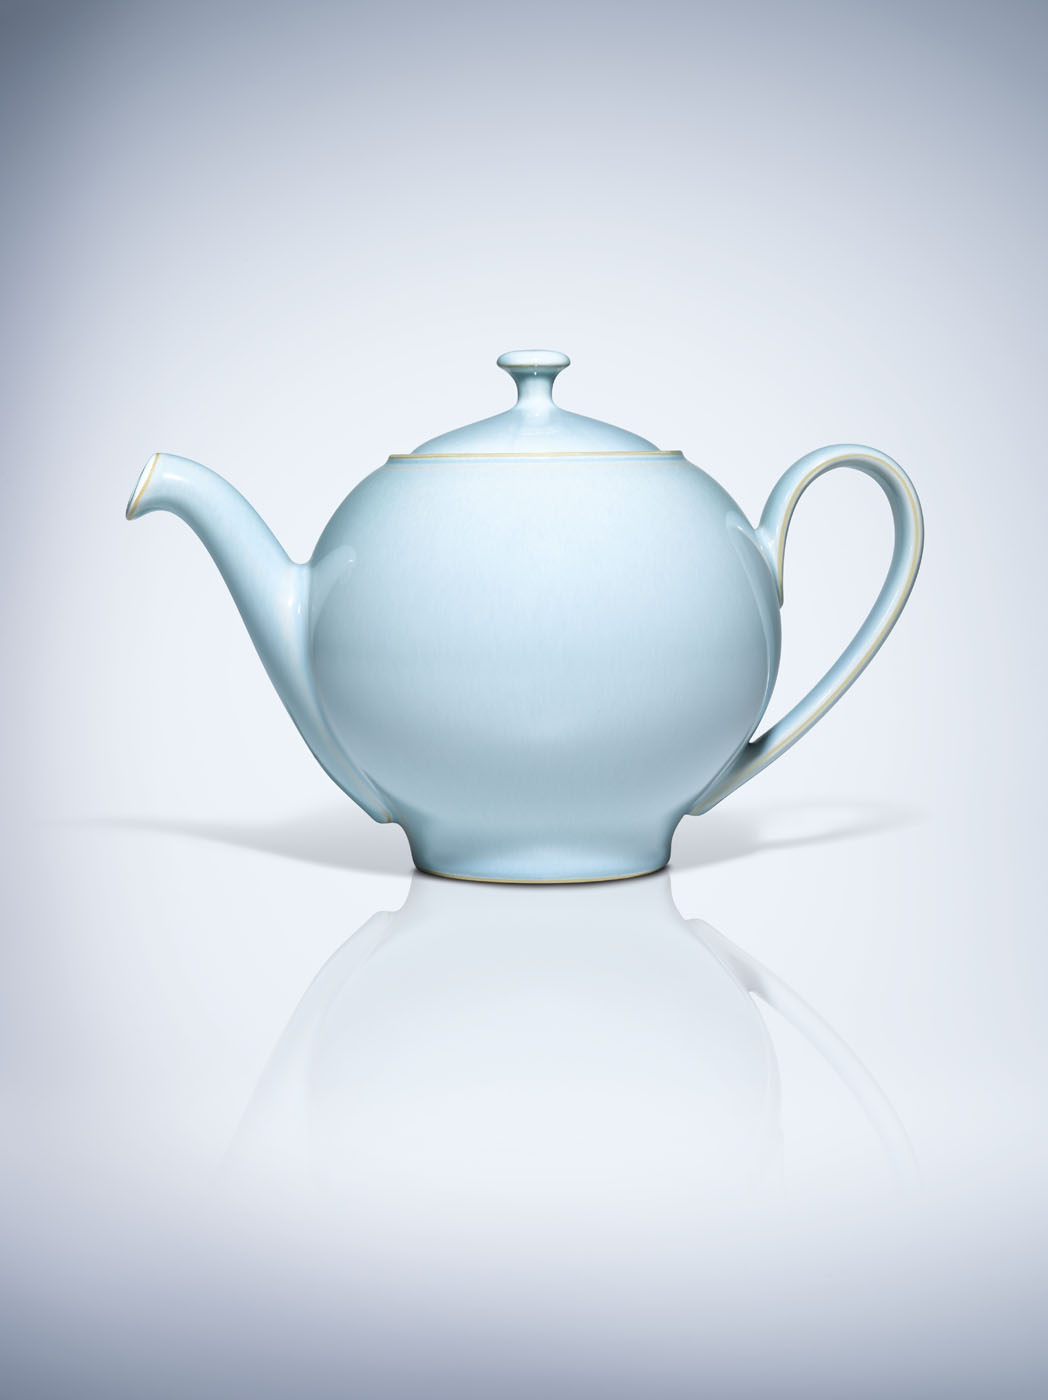 Blue teapot in studio by Alexander Kent London based still life and product photographer.